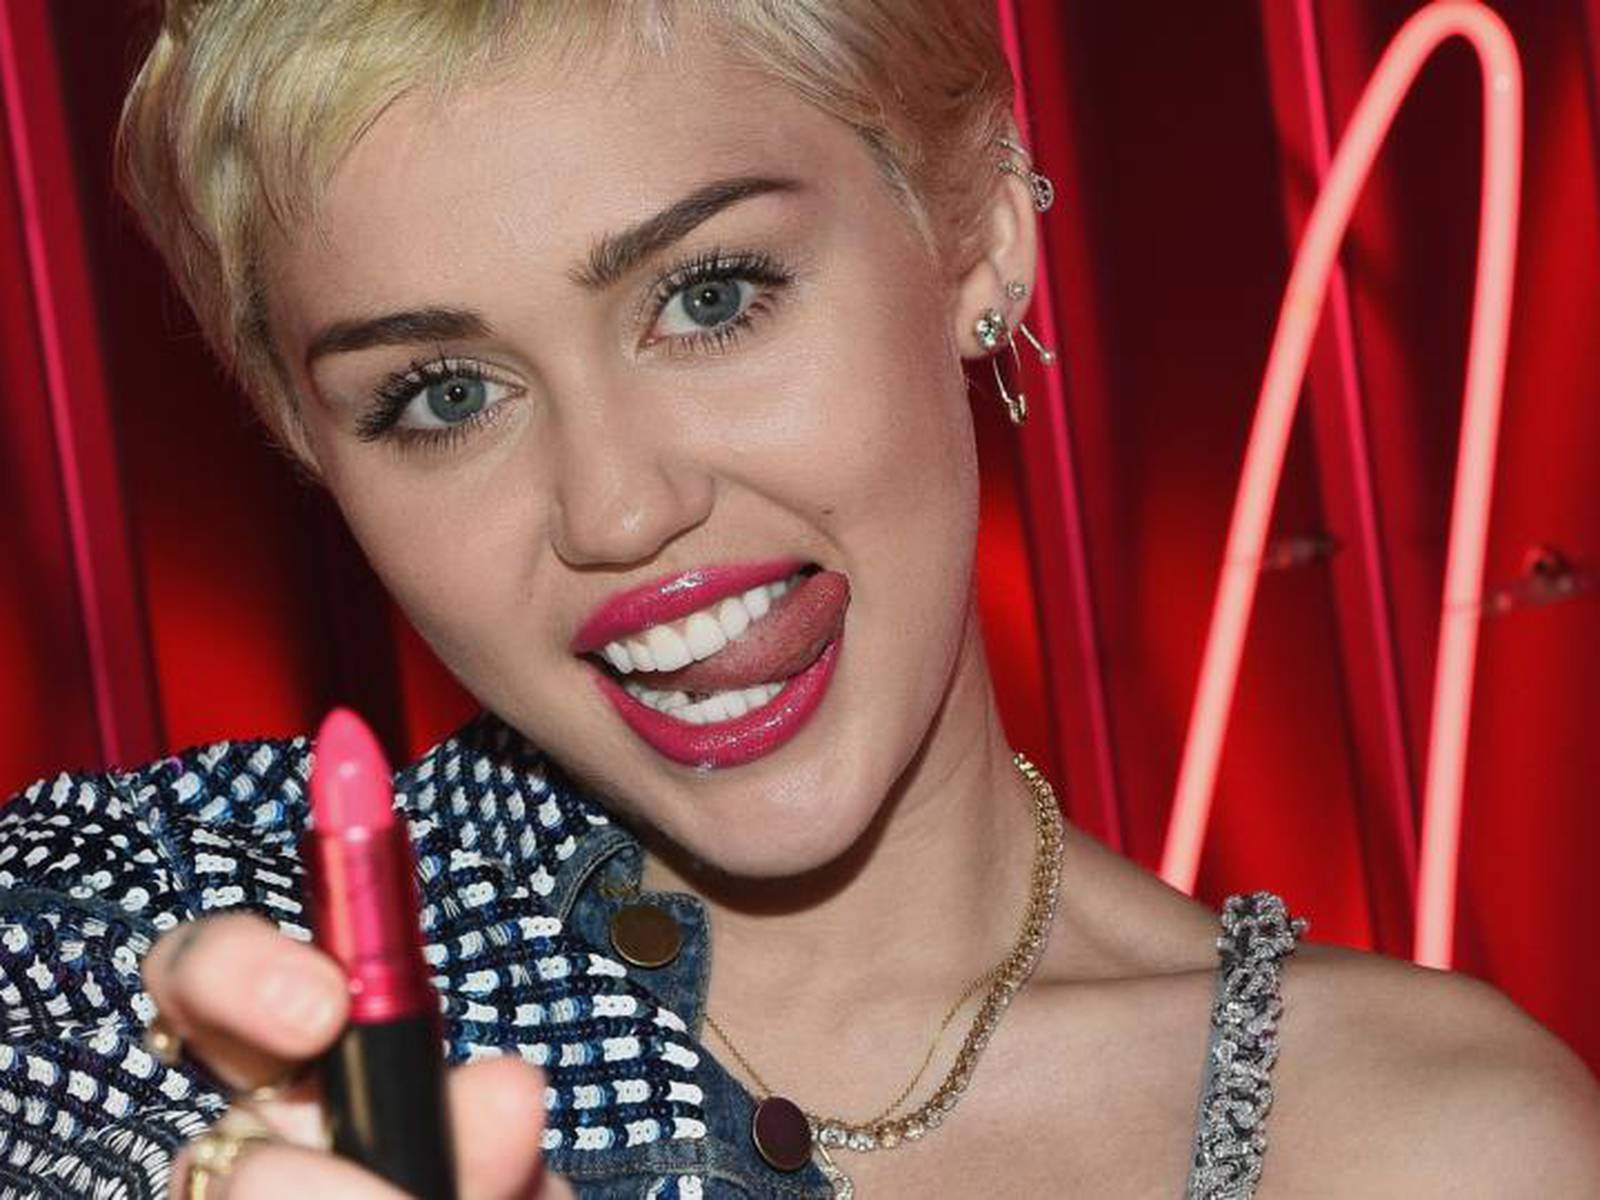 Miley Cyrus: 'I think my generation is in crisis' â€“ The Irish Times